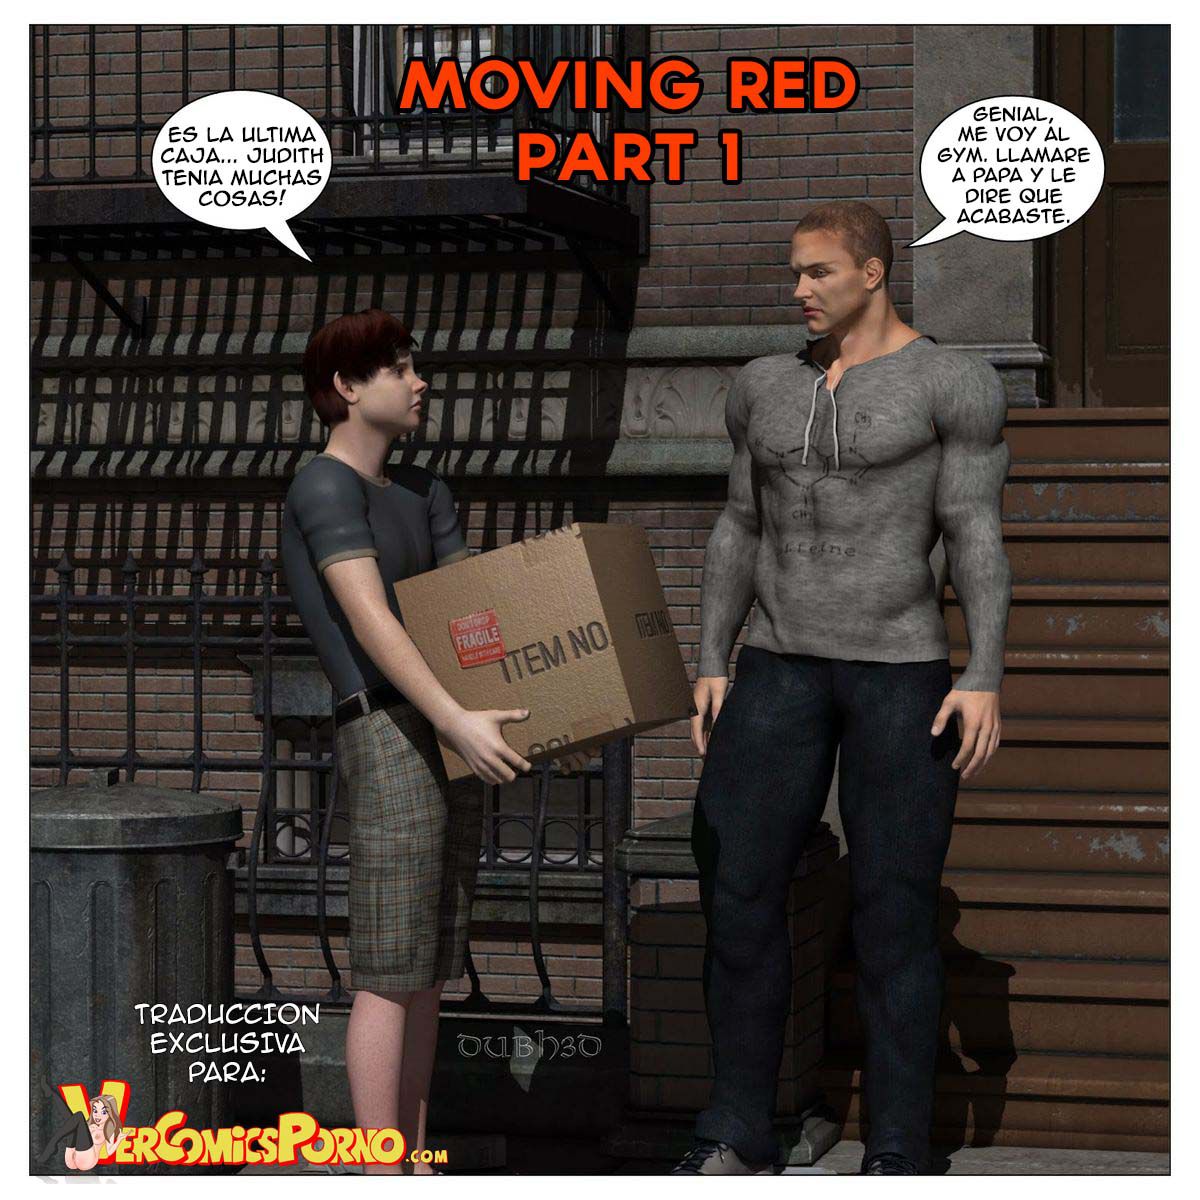 [Dubh3d] Moving Red 1 y2 [Spanish] 1